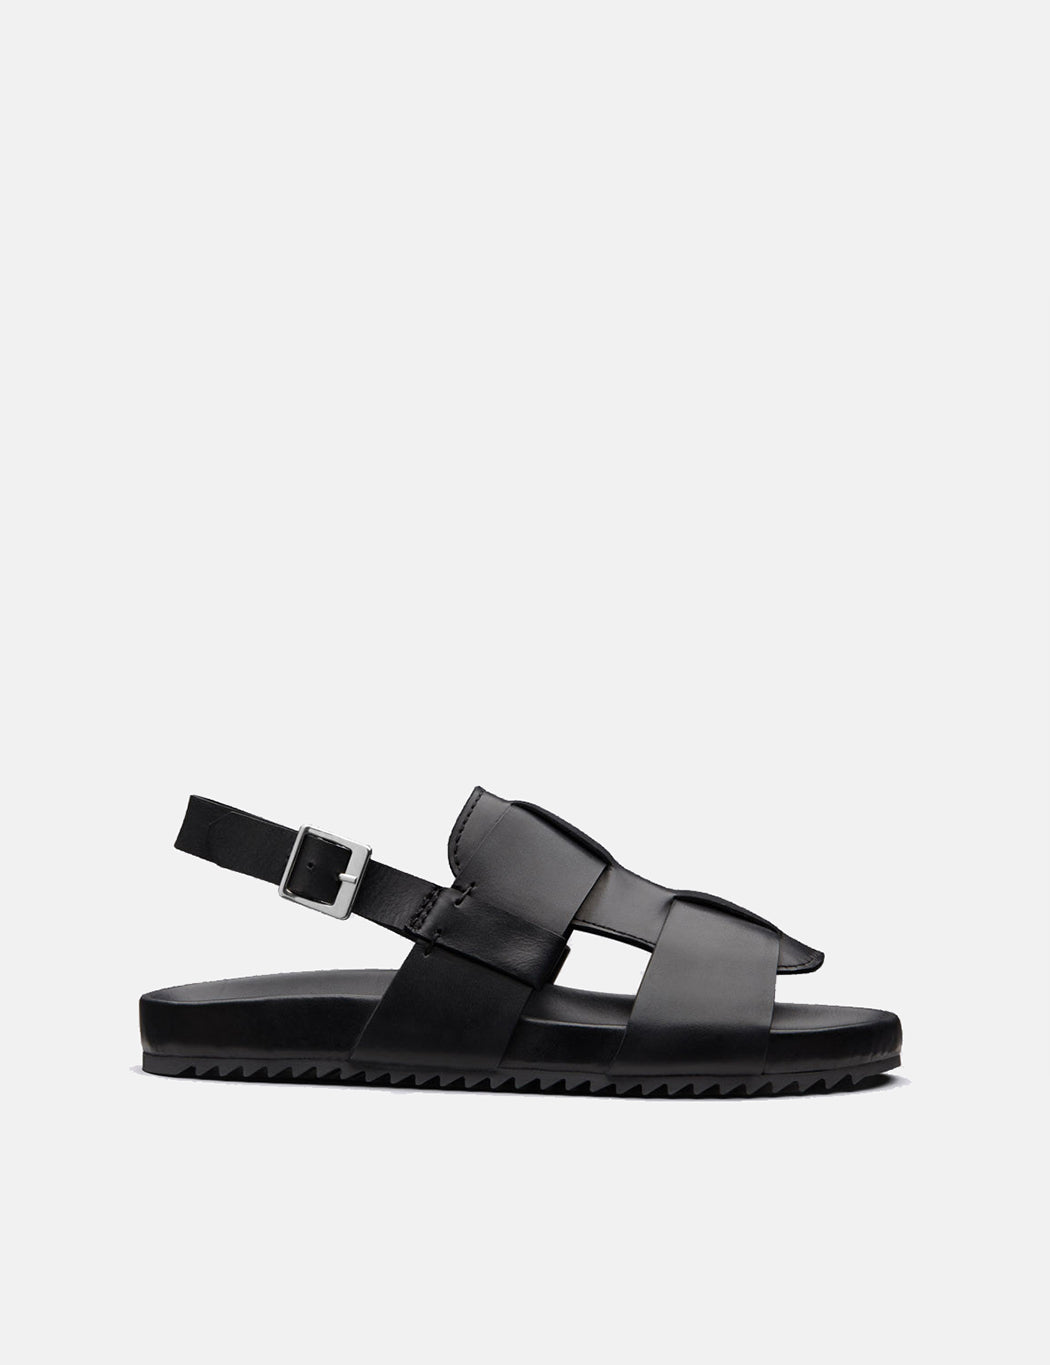 Grenson Wiley Sandal (Leather) - Black | URBAN EXCESS.